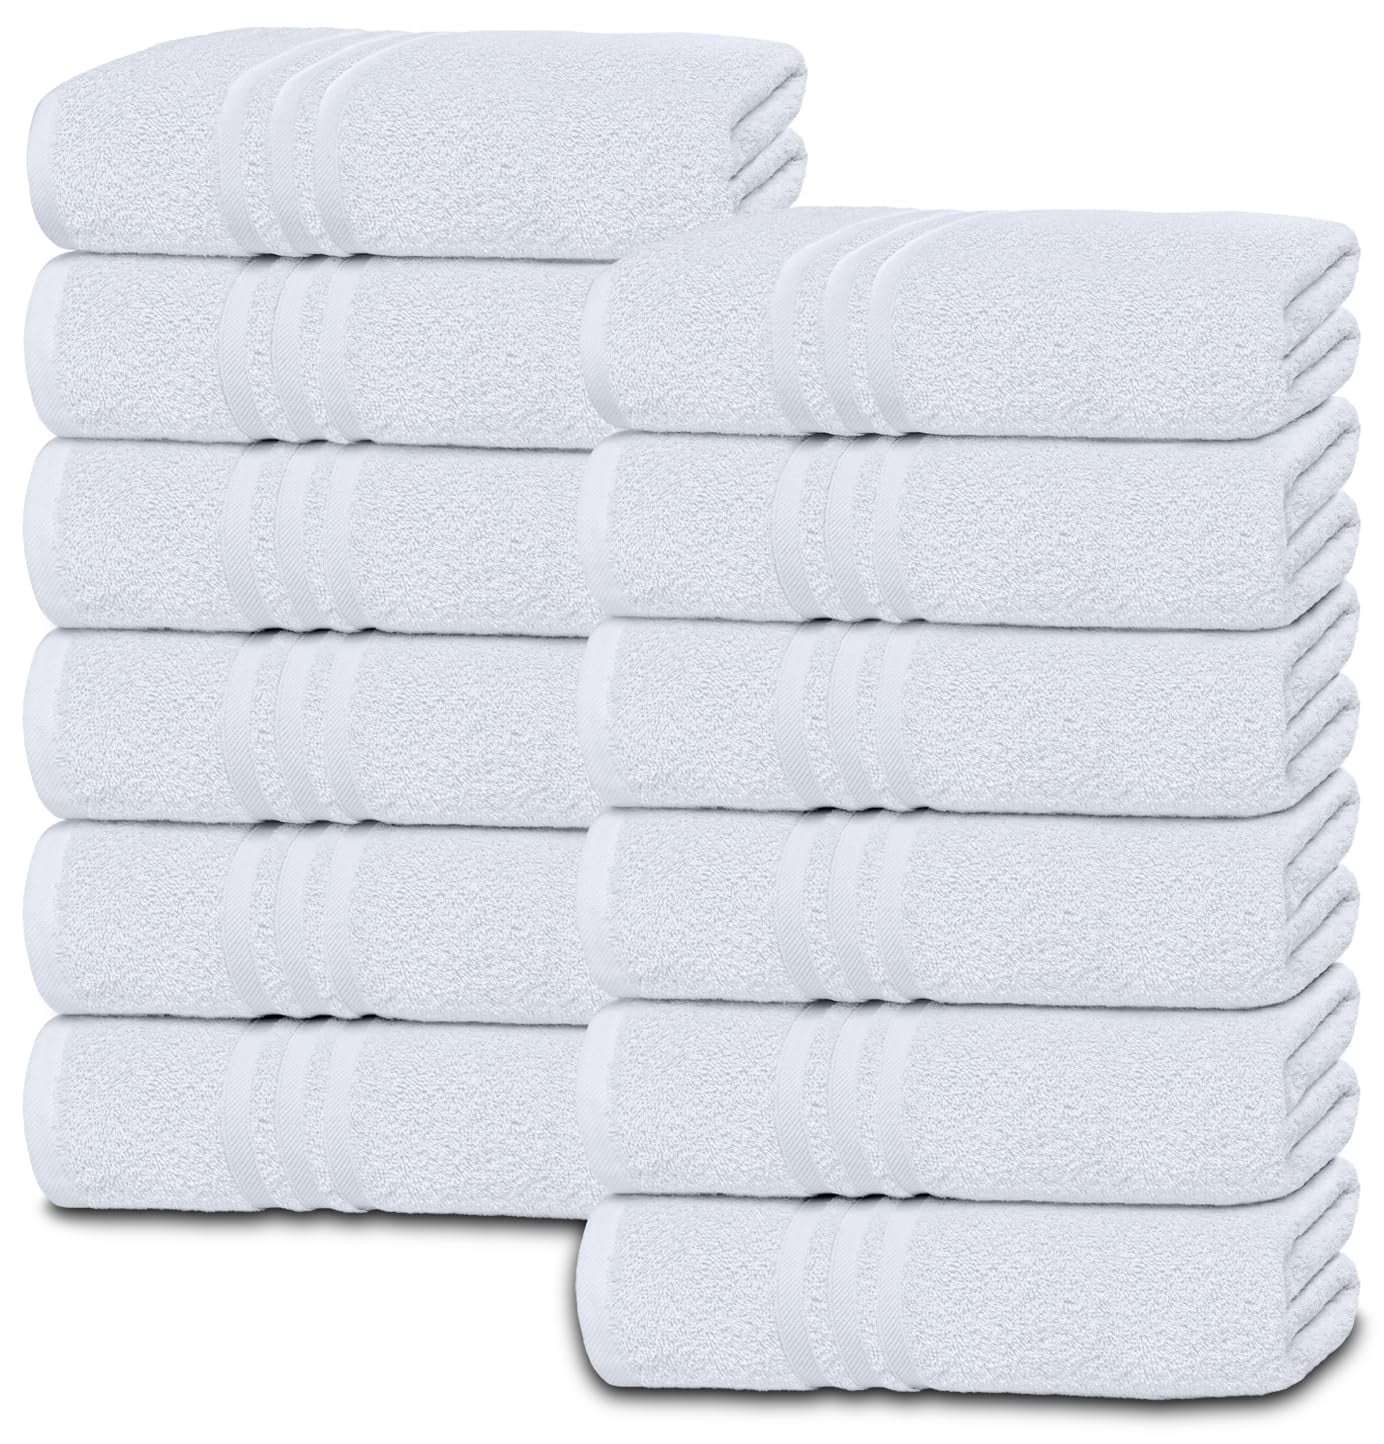 Arkwright Admiral Bathroom Hand Towels (12-Pack), 16x27 in., White, Cotton/Poly Blend, Size: 16 x 27